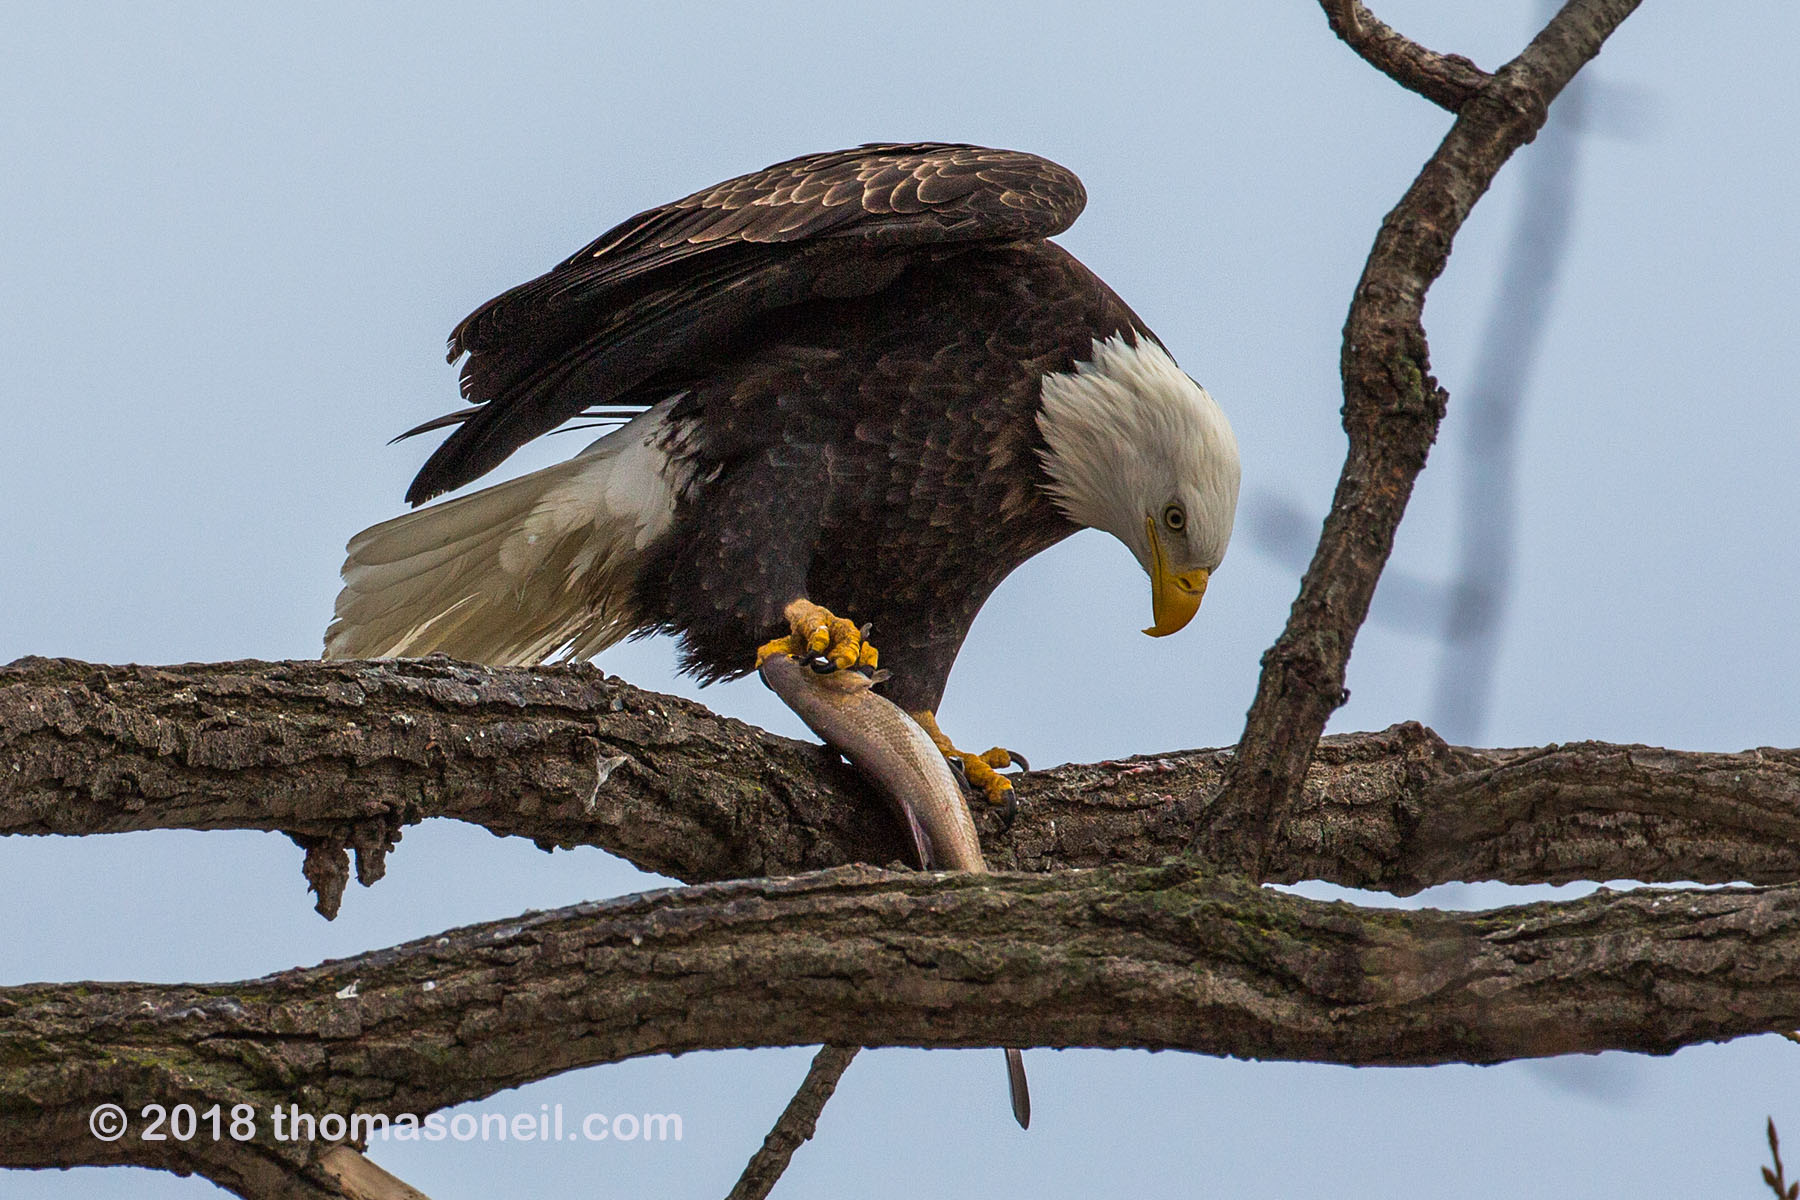 Bald eagle eating fish, 5 of 7 in sequence, Keokuk, Iowa, January 2018.  Click for next photo.